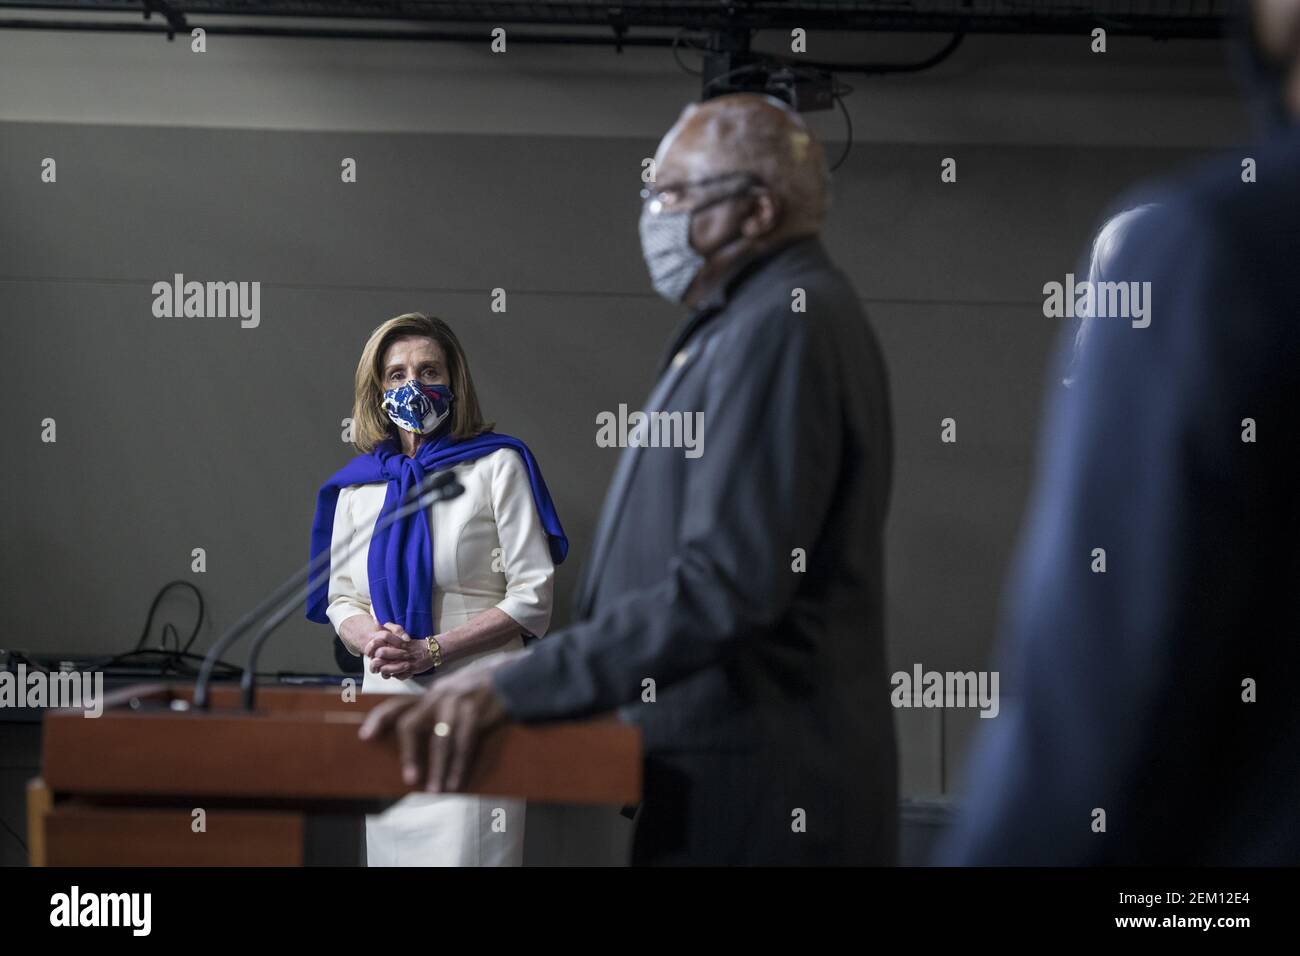 Speaker of the United States House of Representatives Nancy Pelosi (Democrat of California), left, listens as United States House Assistant Democratic Leader James Clyburn (Democrat of South Carolina) offers remarks as they are joined by other members of the House Democratic leadership, to offer remarks and field questions from reporters during a press conference at the US Capitol in Washington, DC, Wednesday, November 18, 2020. Credit: Rod Lamkey / CNP/Sipa USA Stock Photo